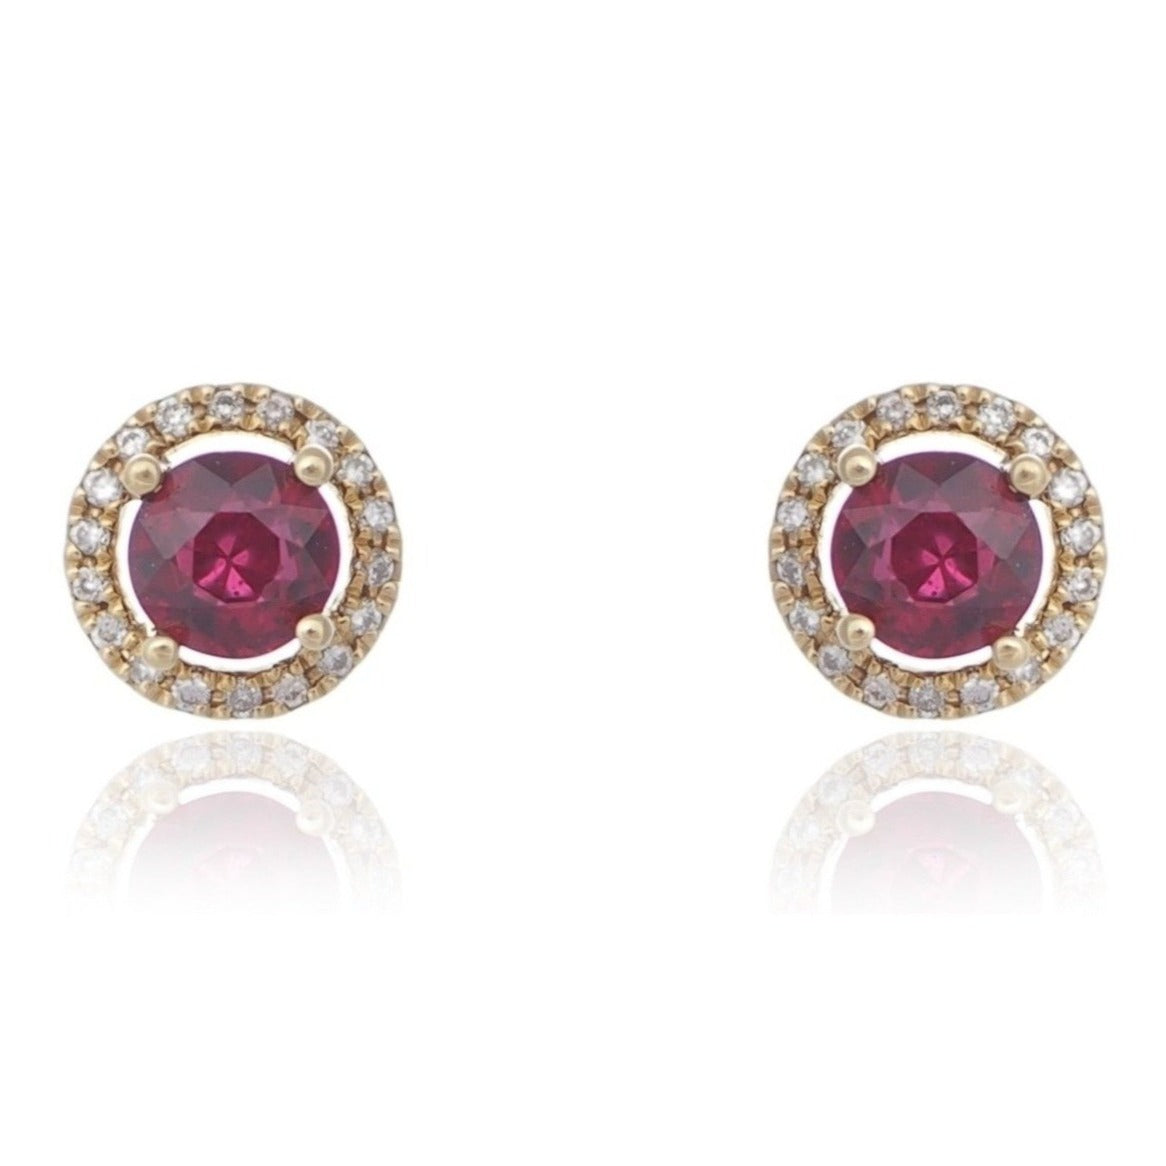 Round Ruby and diamond halo earrings yellow gold Harrogate jewellers Fogal and Barnes 